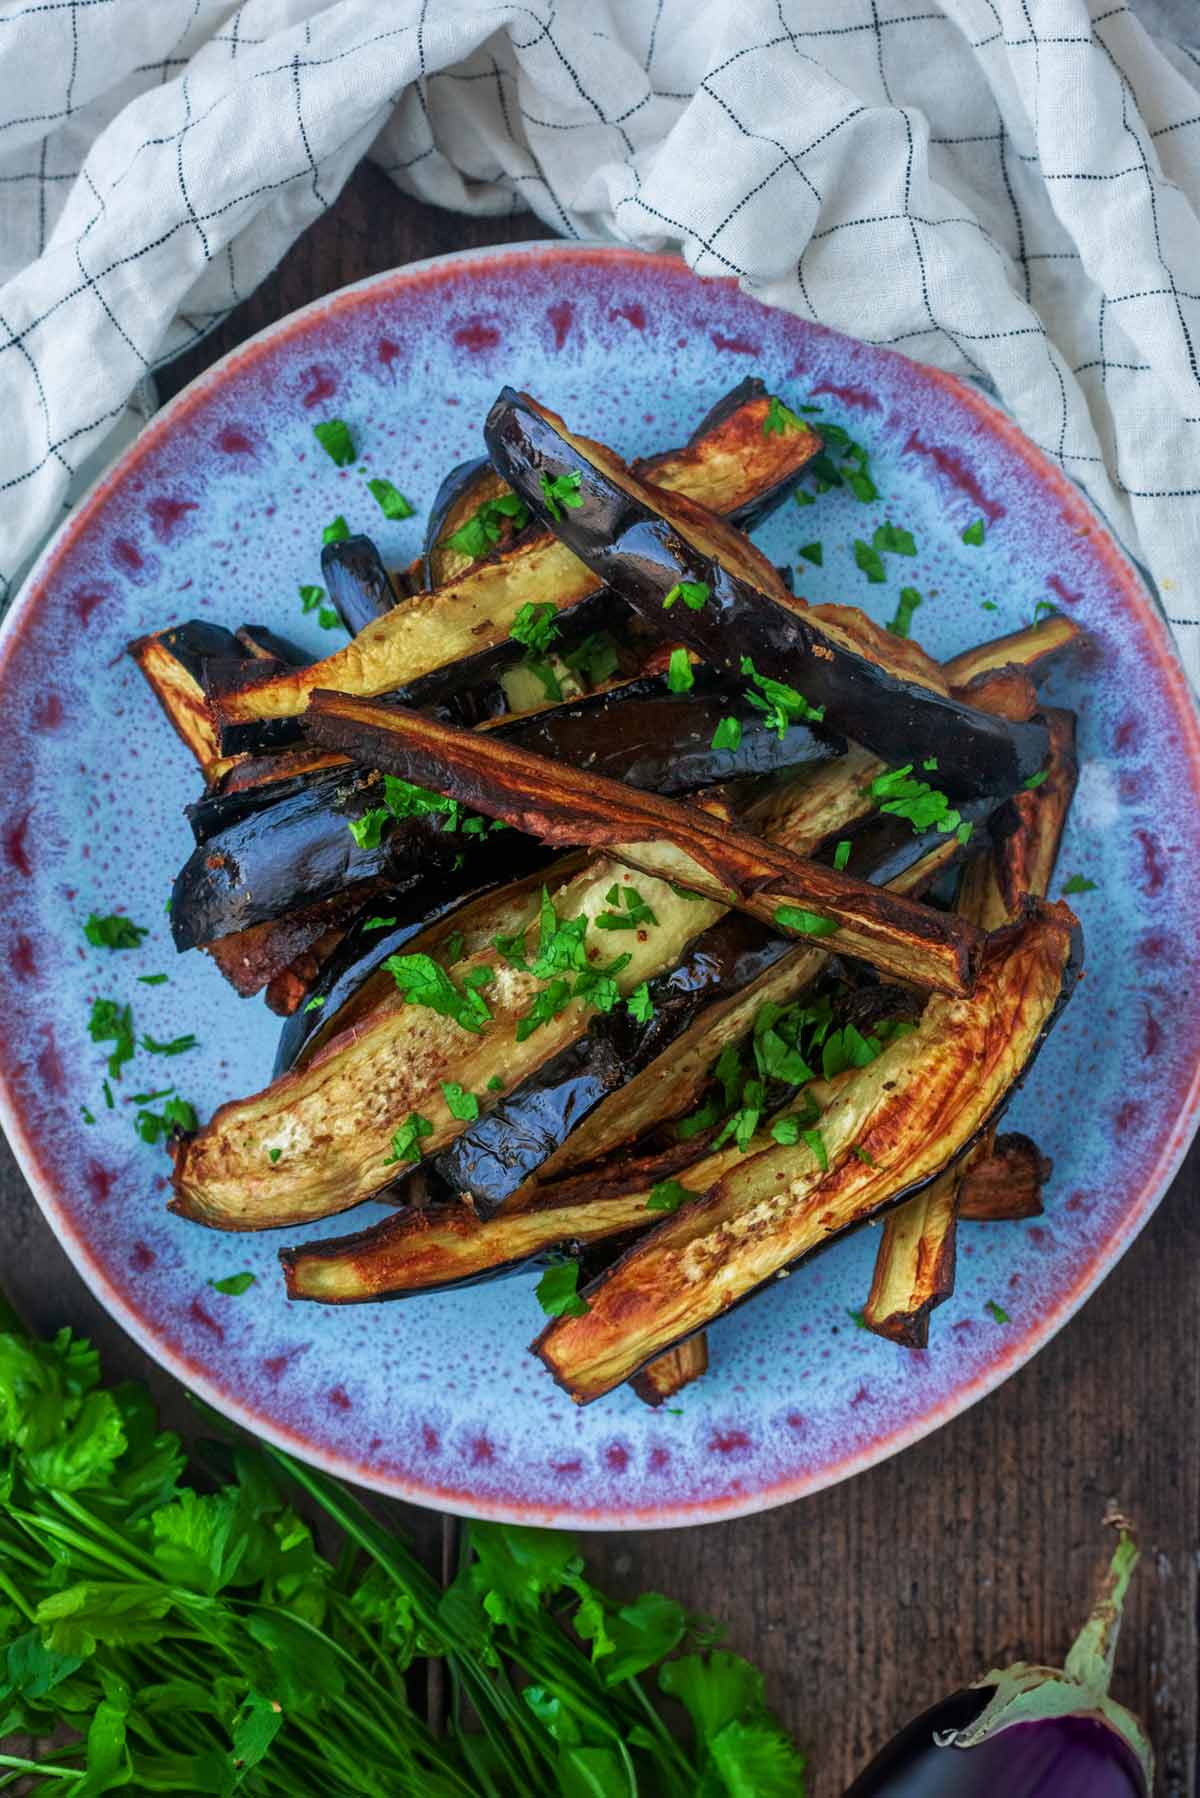 A plate of cooked aubergine strips next to a whole aubergine and a bunch of coriander.